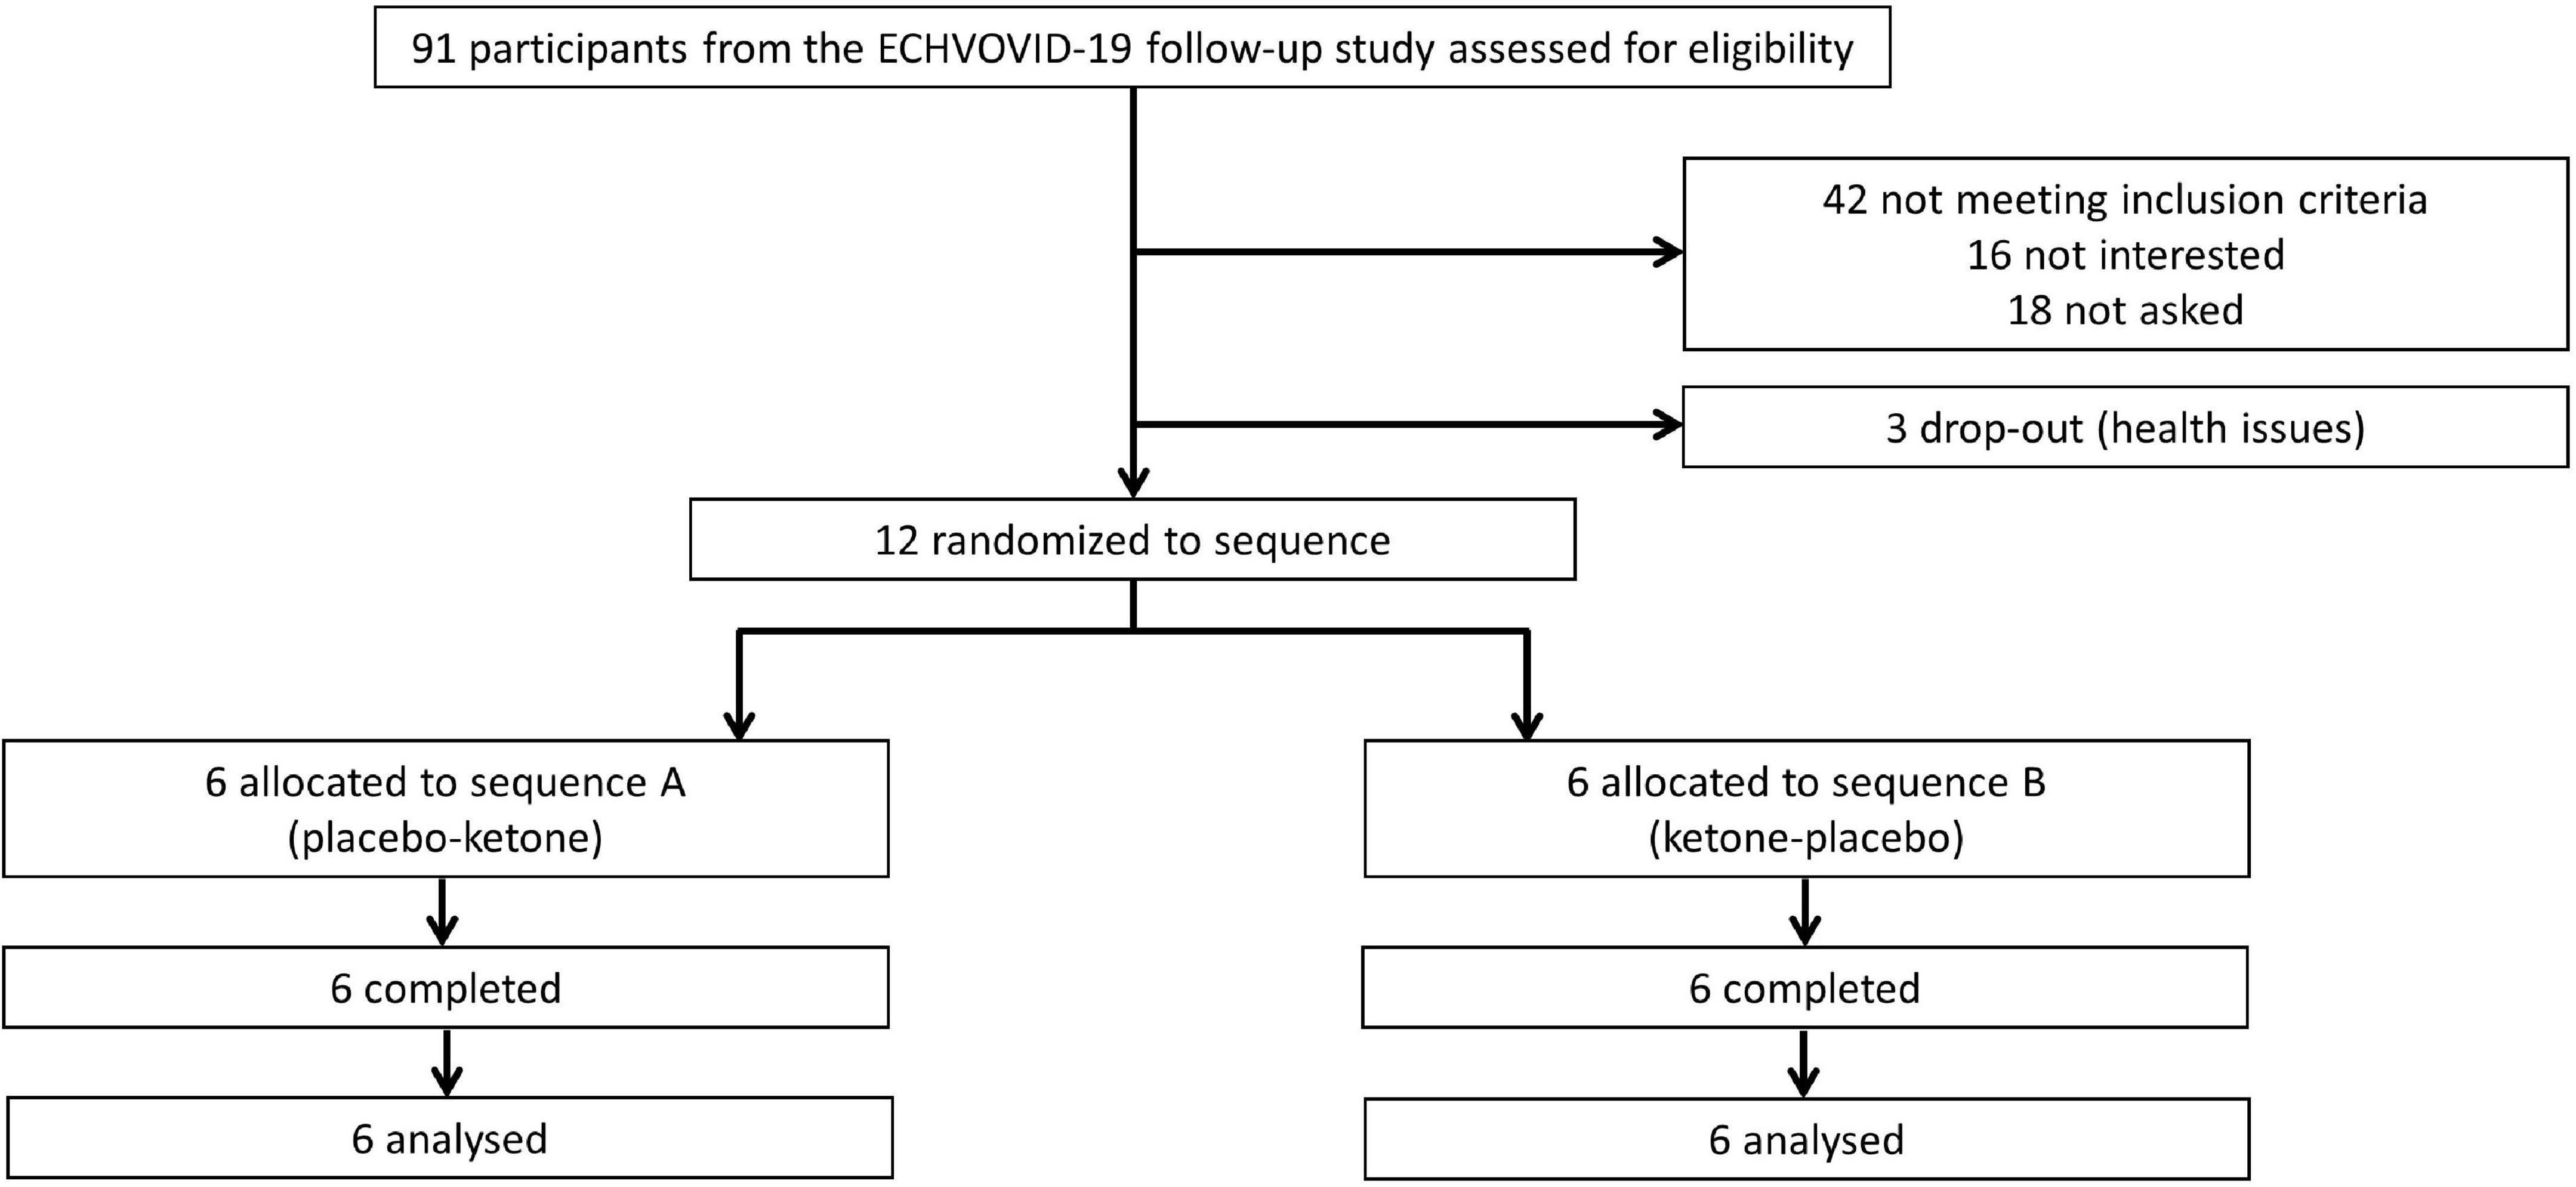 Oral ketone esters acutely improve myocardial contractility in post-hospitalized COVID-19 patients: A randomized placebo-controlled double-blind crossover study